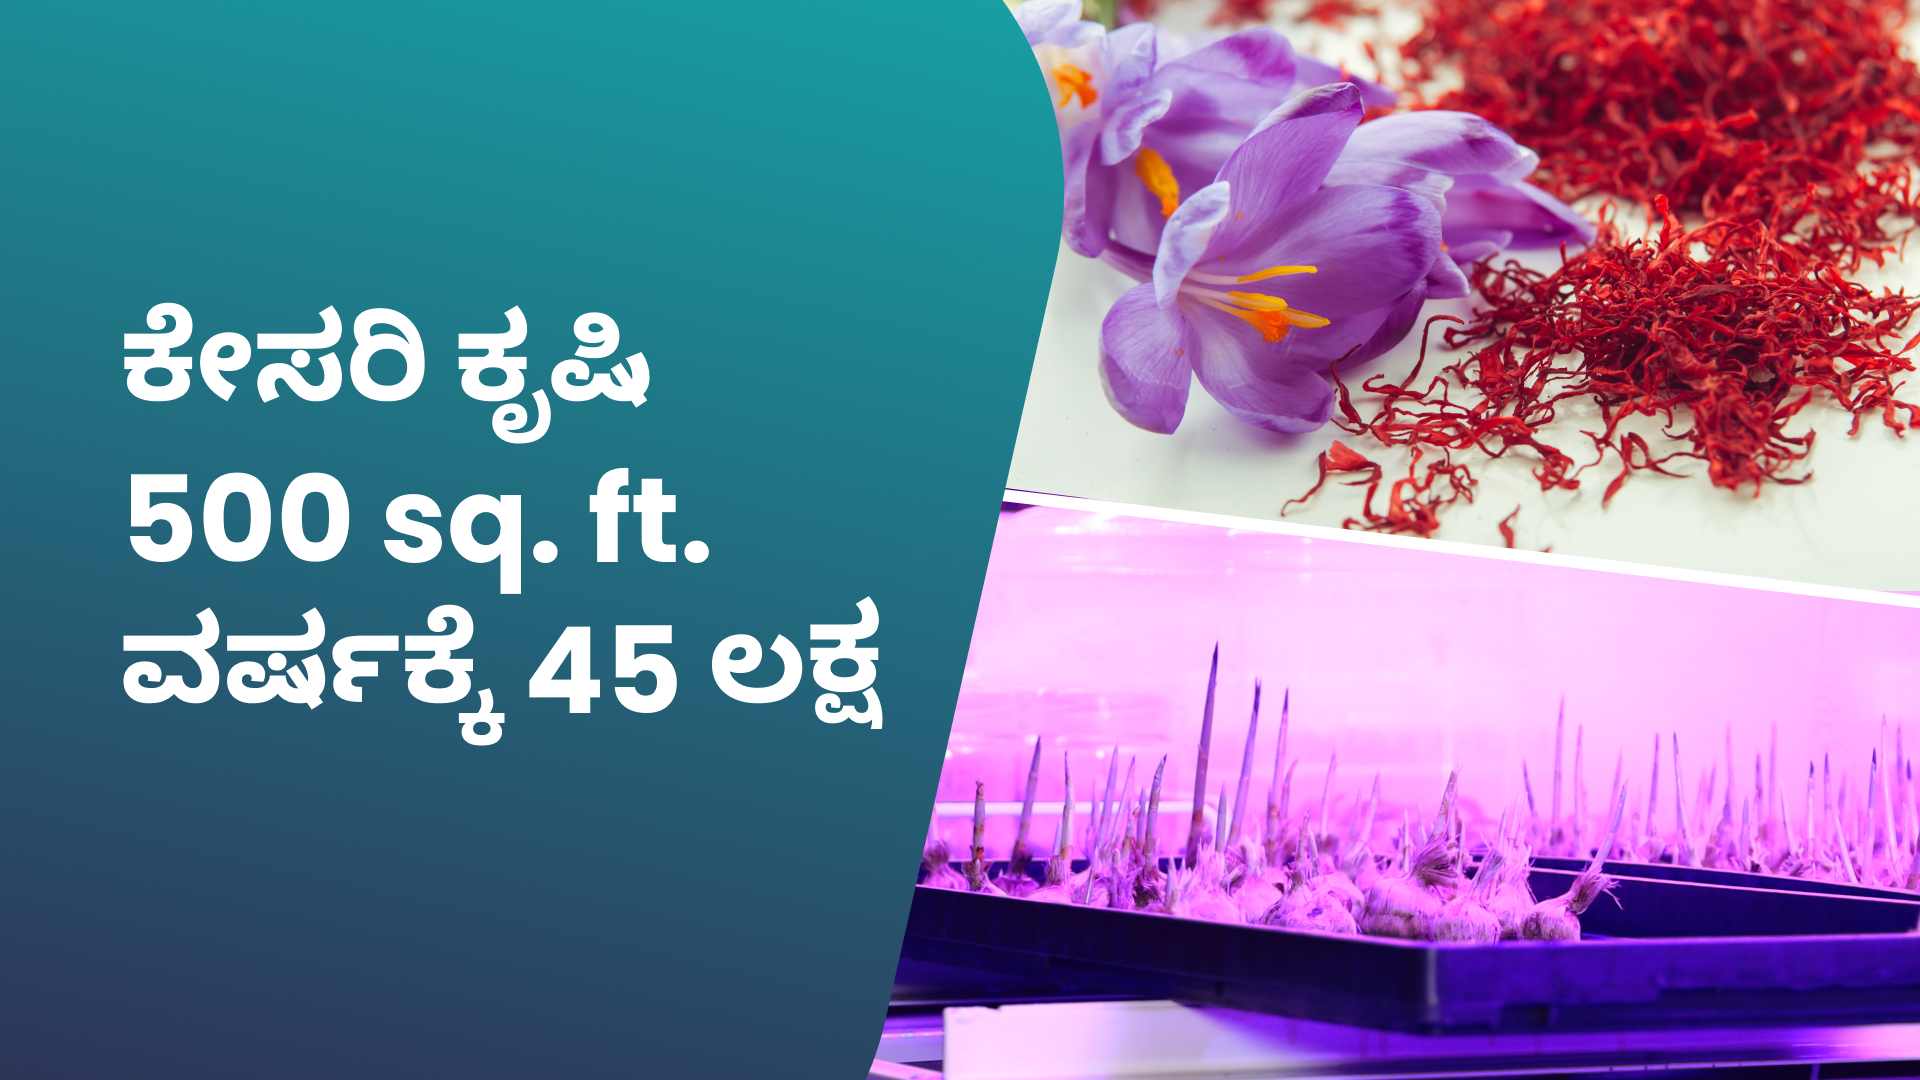 saffron farming earn up to 45 lakh profityear in just 500 sq ft sp Kannada web